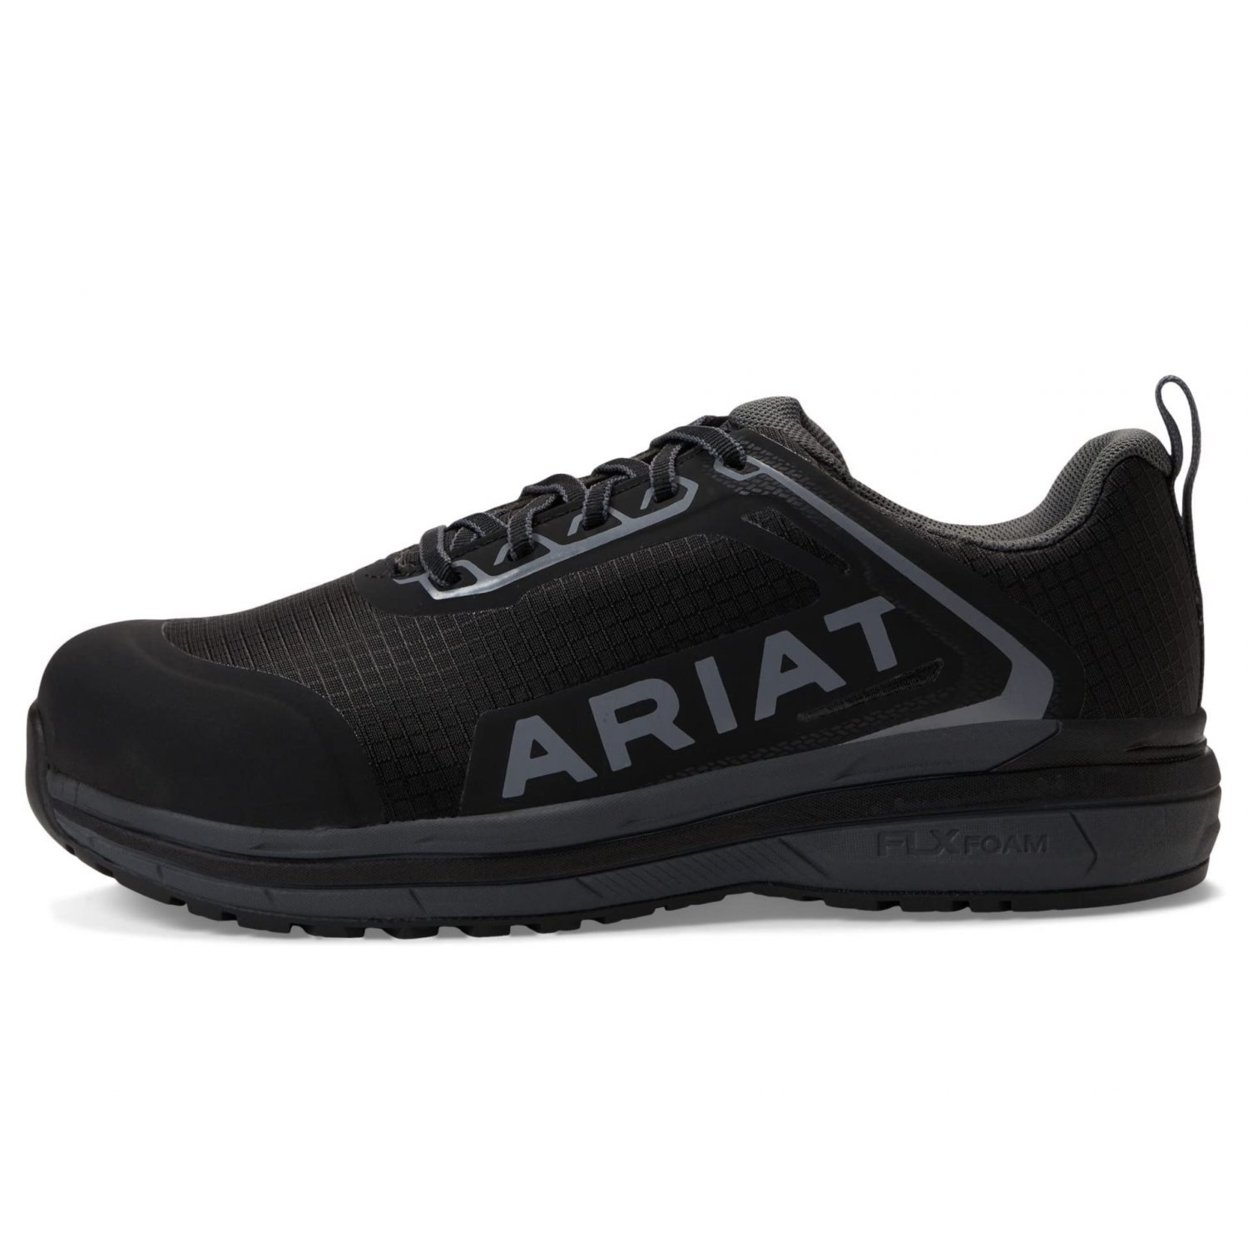 ARIAT Women's Outpace Composite Toe Safety Shoe Fire ONE SIZE BLACK - BLACK, 6